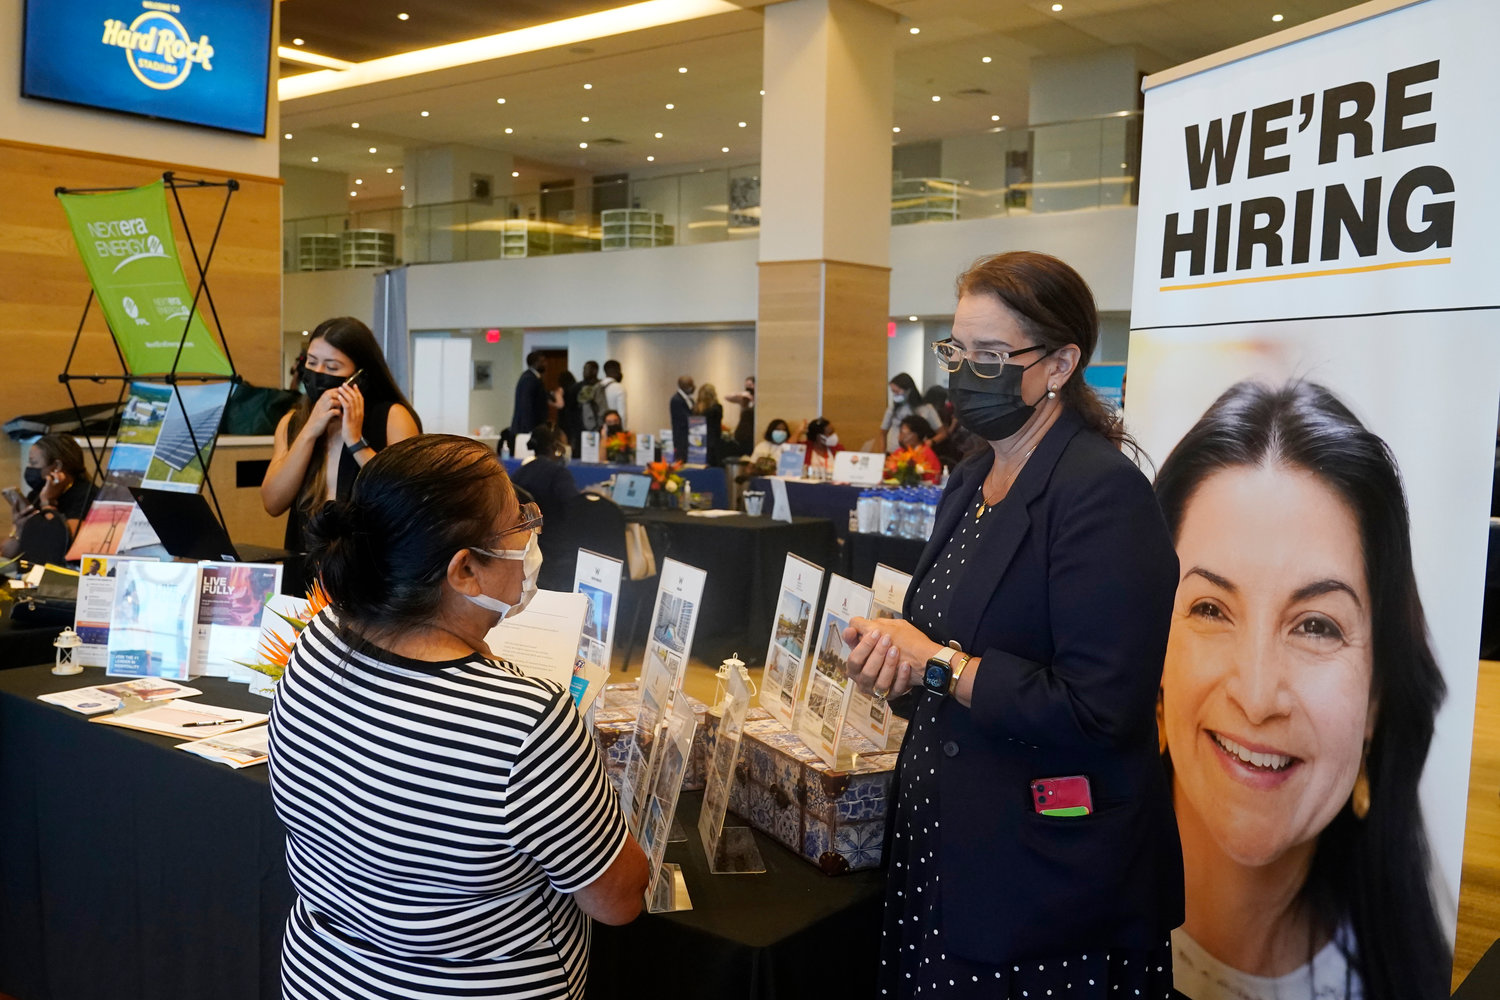 FILE - Marriott human resources recruiter Mariela Cuevas, left, talks to Lisbet Oliveros, during a job fair at Hard Rock Stadium, Friday, Sept. 3, 2021, in Miami Gardens, Fla.  The number of Americans applying for unemployment benefits fell to a new pandemic low 267,000 last week, another sign that the job market is recovering from last year’s sharp coronavirus downturn. Jobless claims fell by 4,000 last week, the Labor Department reported Wednesday, Nov. 10.